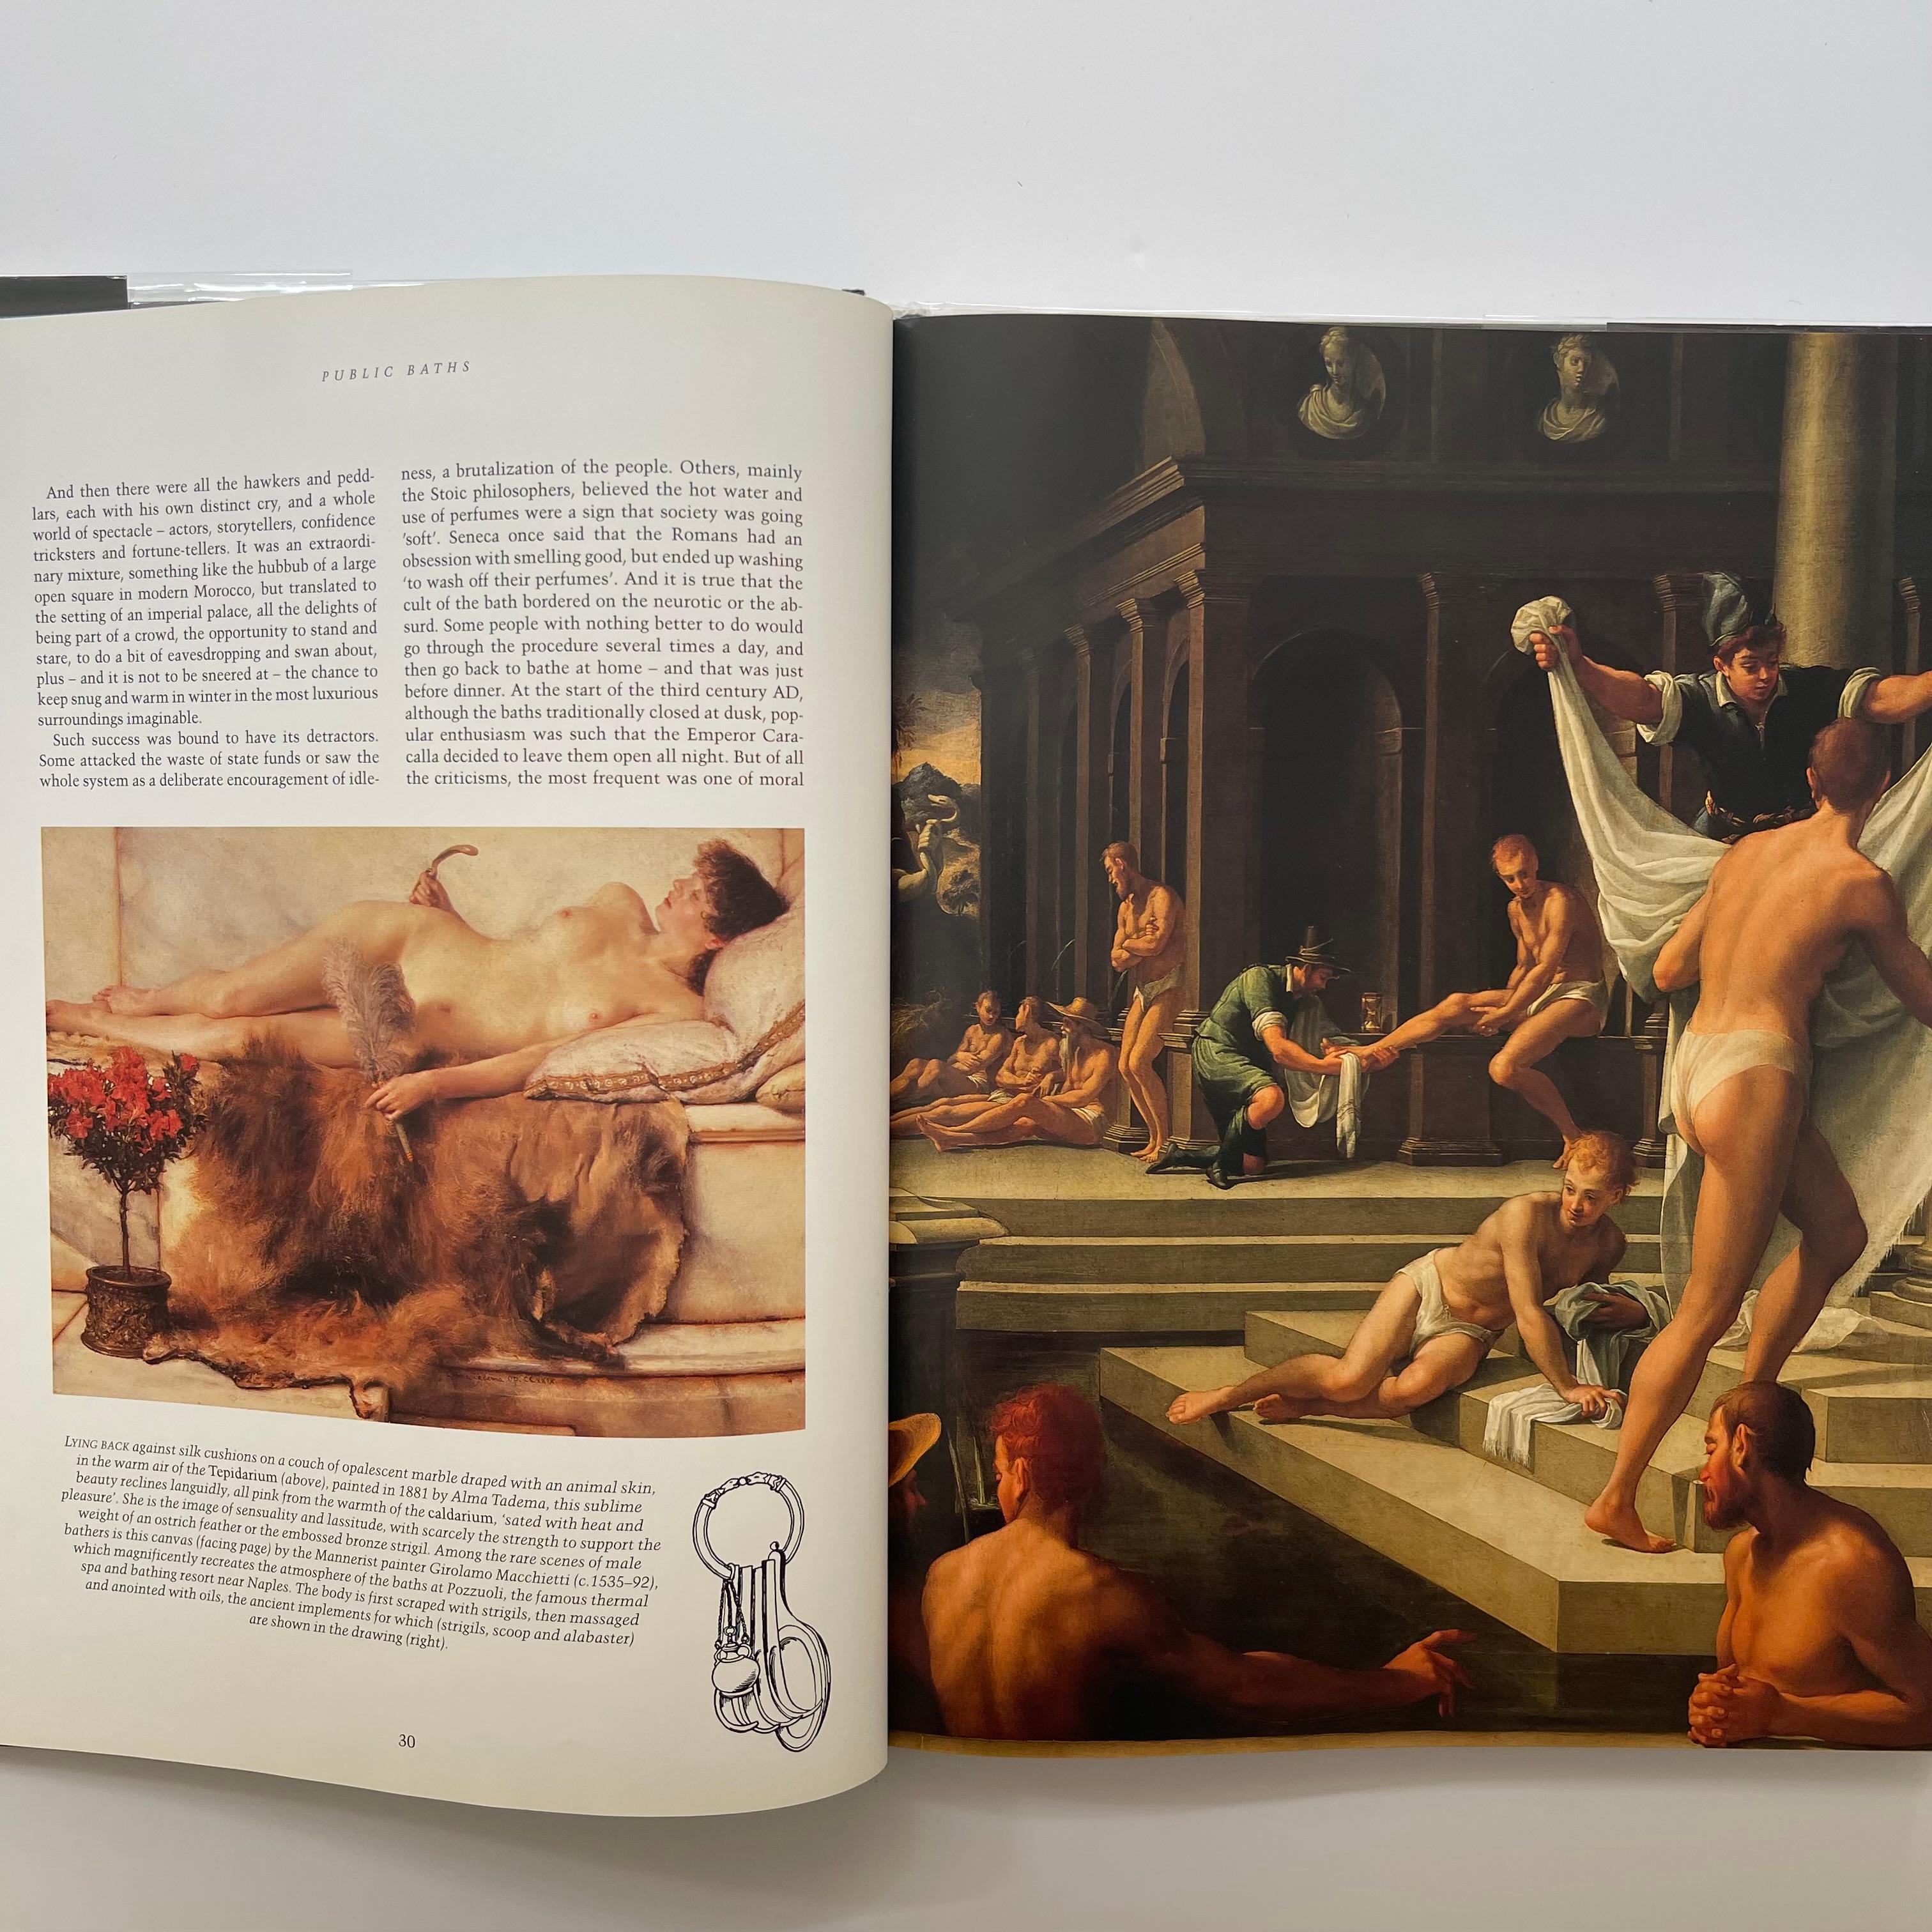 1st US edition Published by Rizzoli 1998

Revealing the secrets of bathrooms from the hedonistic world of the Roman 